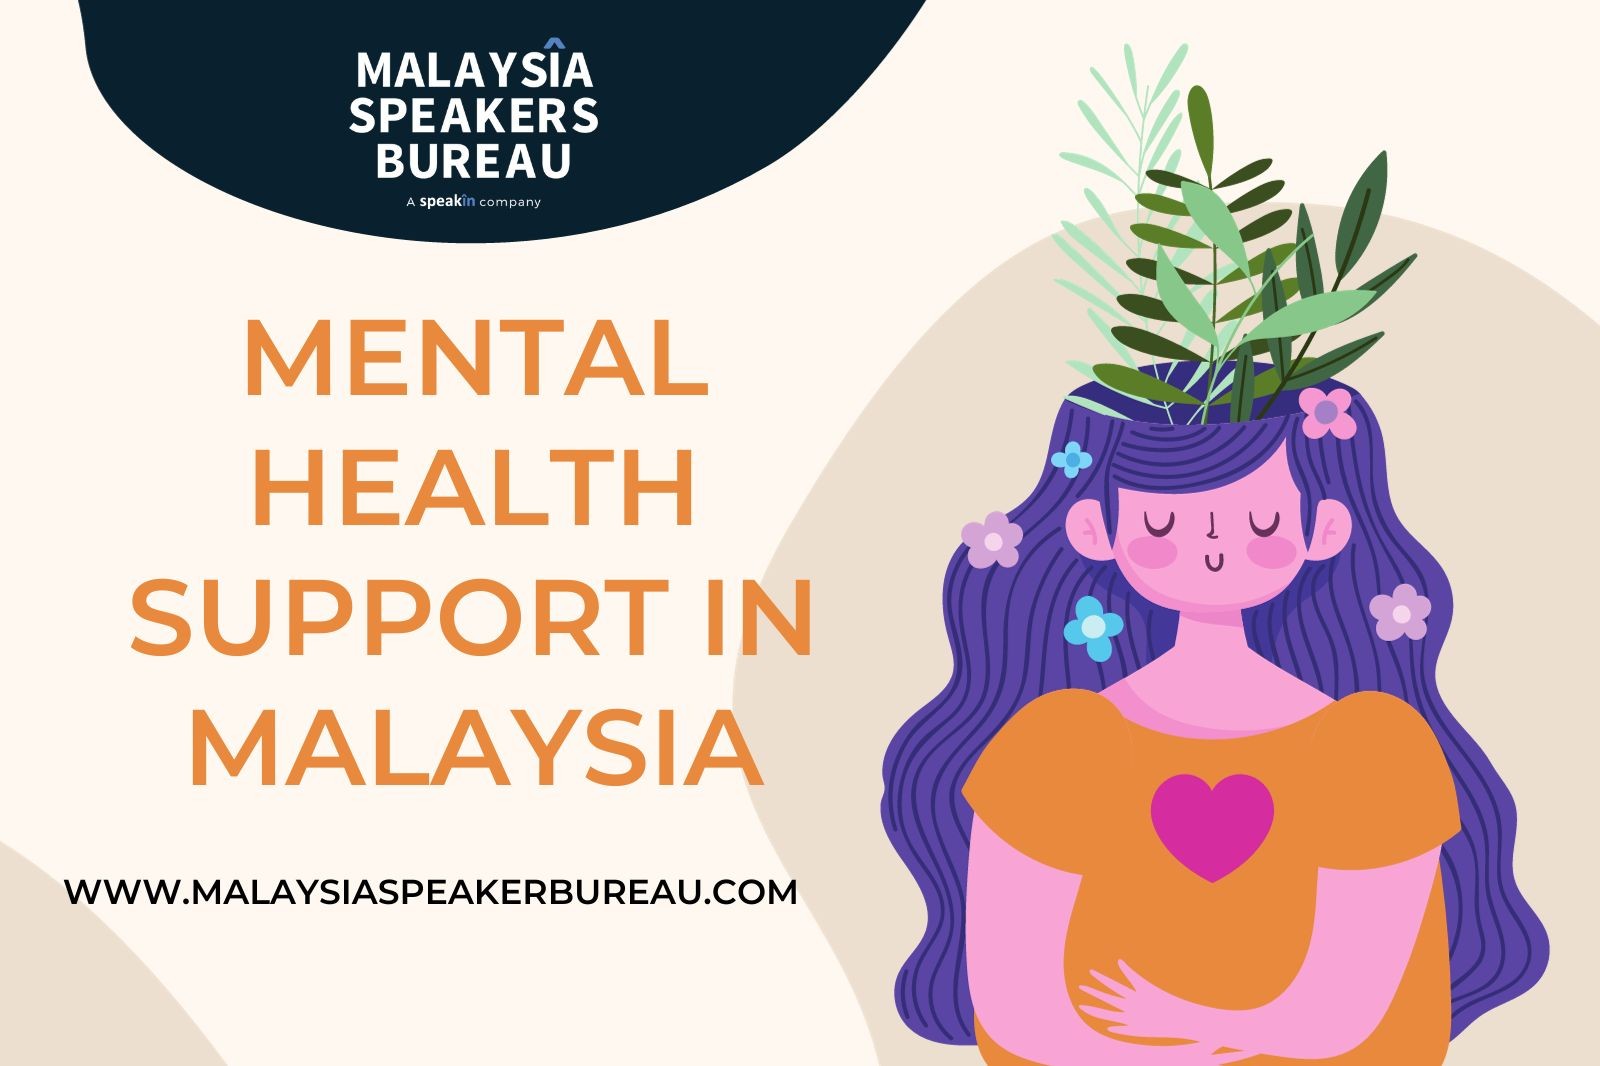 Mental Health-Related Searches on the Rise in Malaysia: How Can Mental Health Speakers Support?